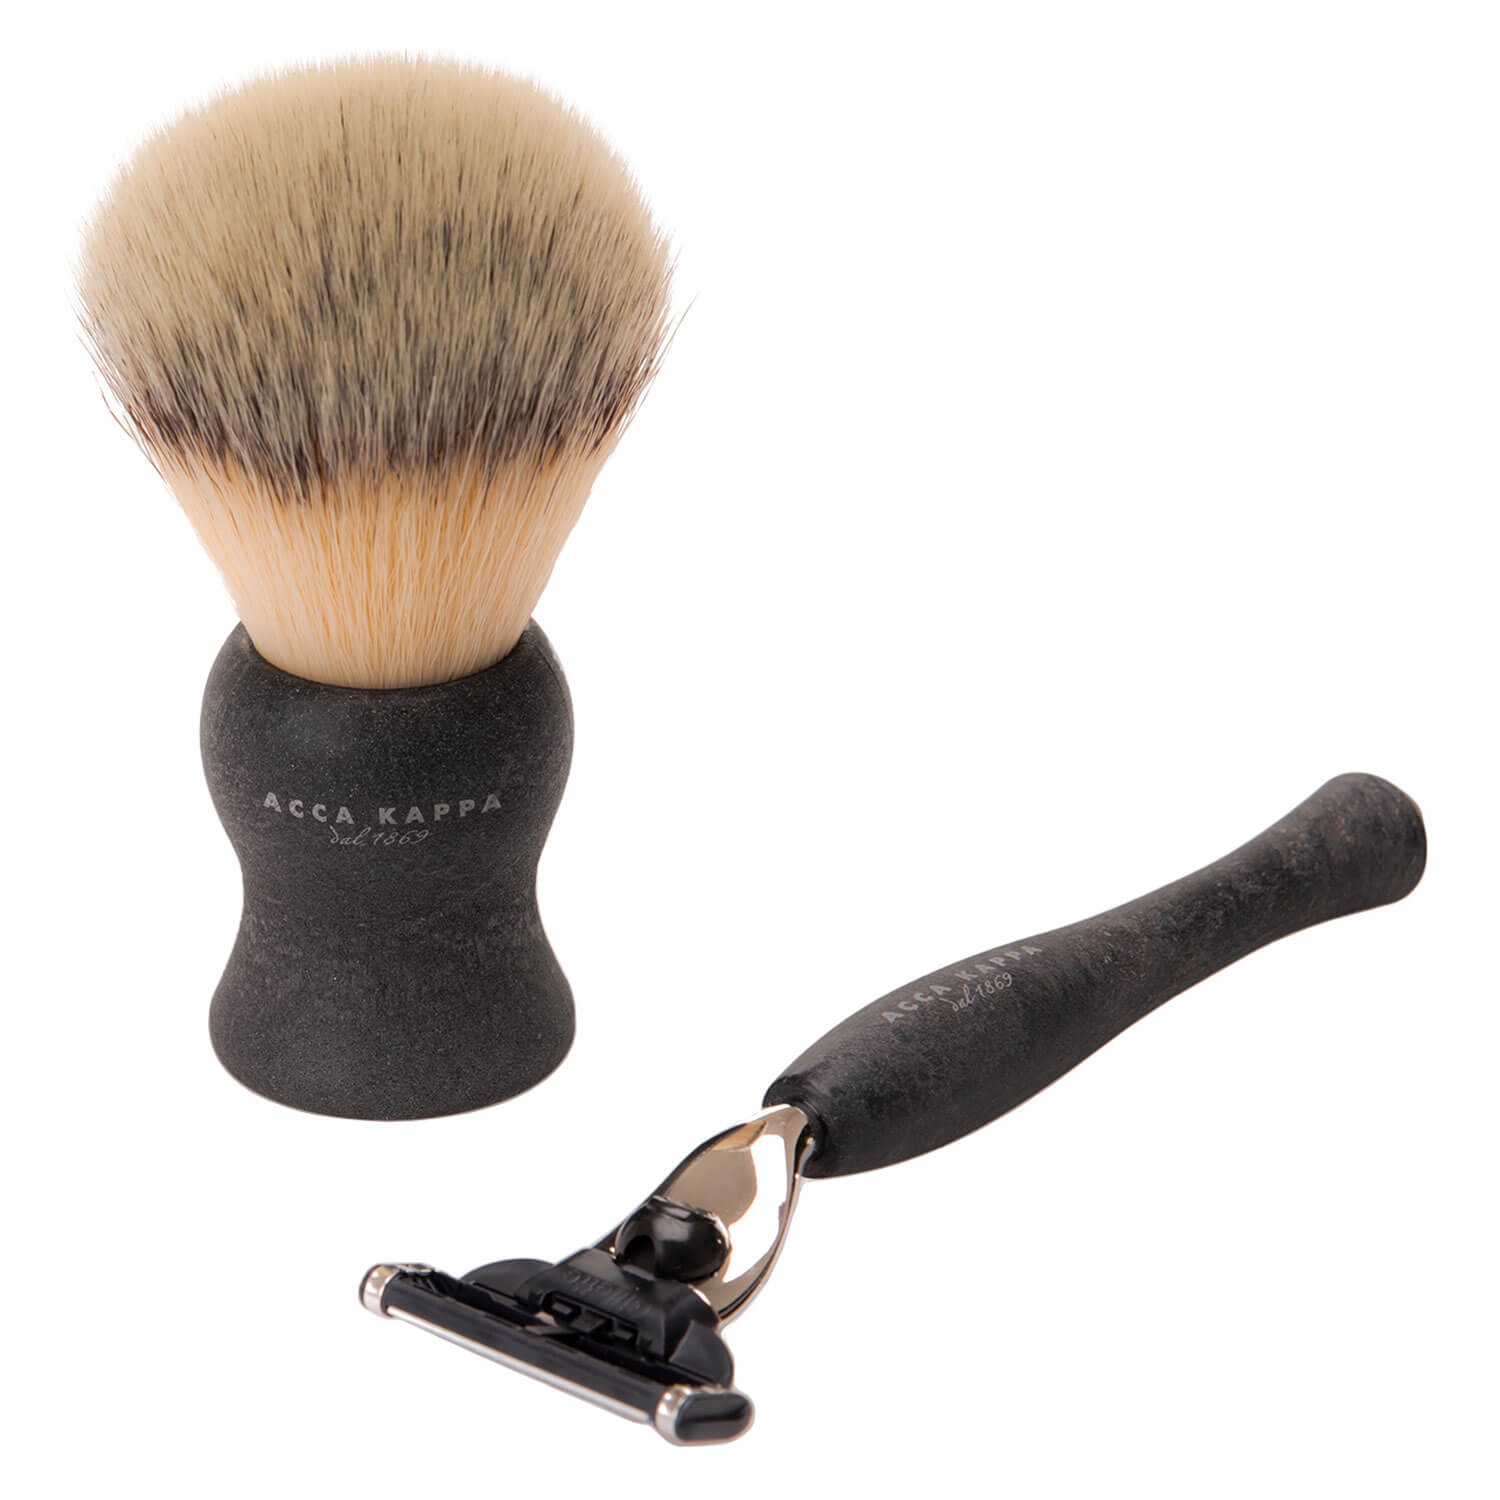 Product image from ACCA KAPPA - Shaving Set